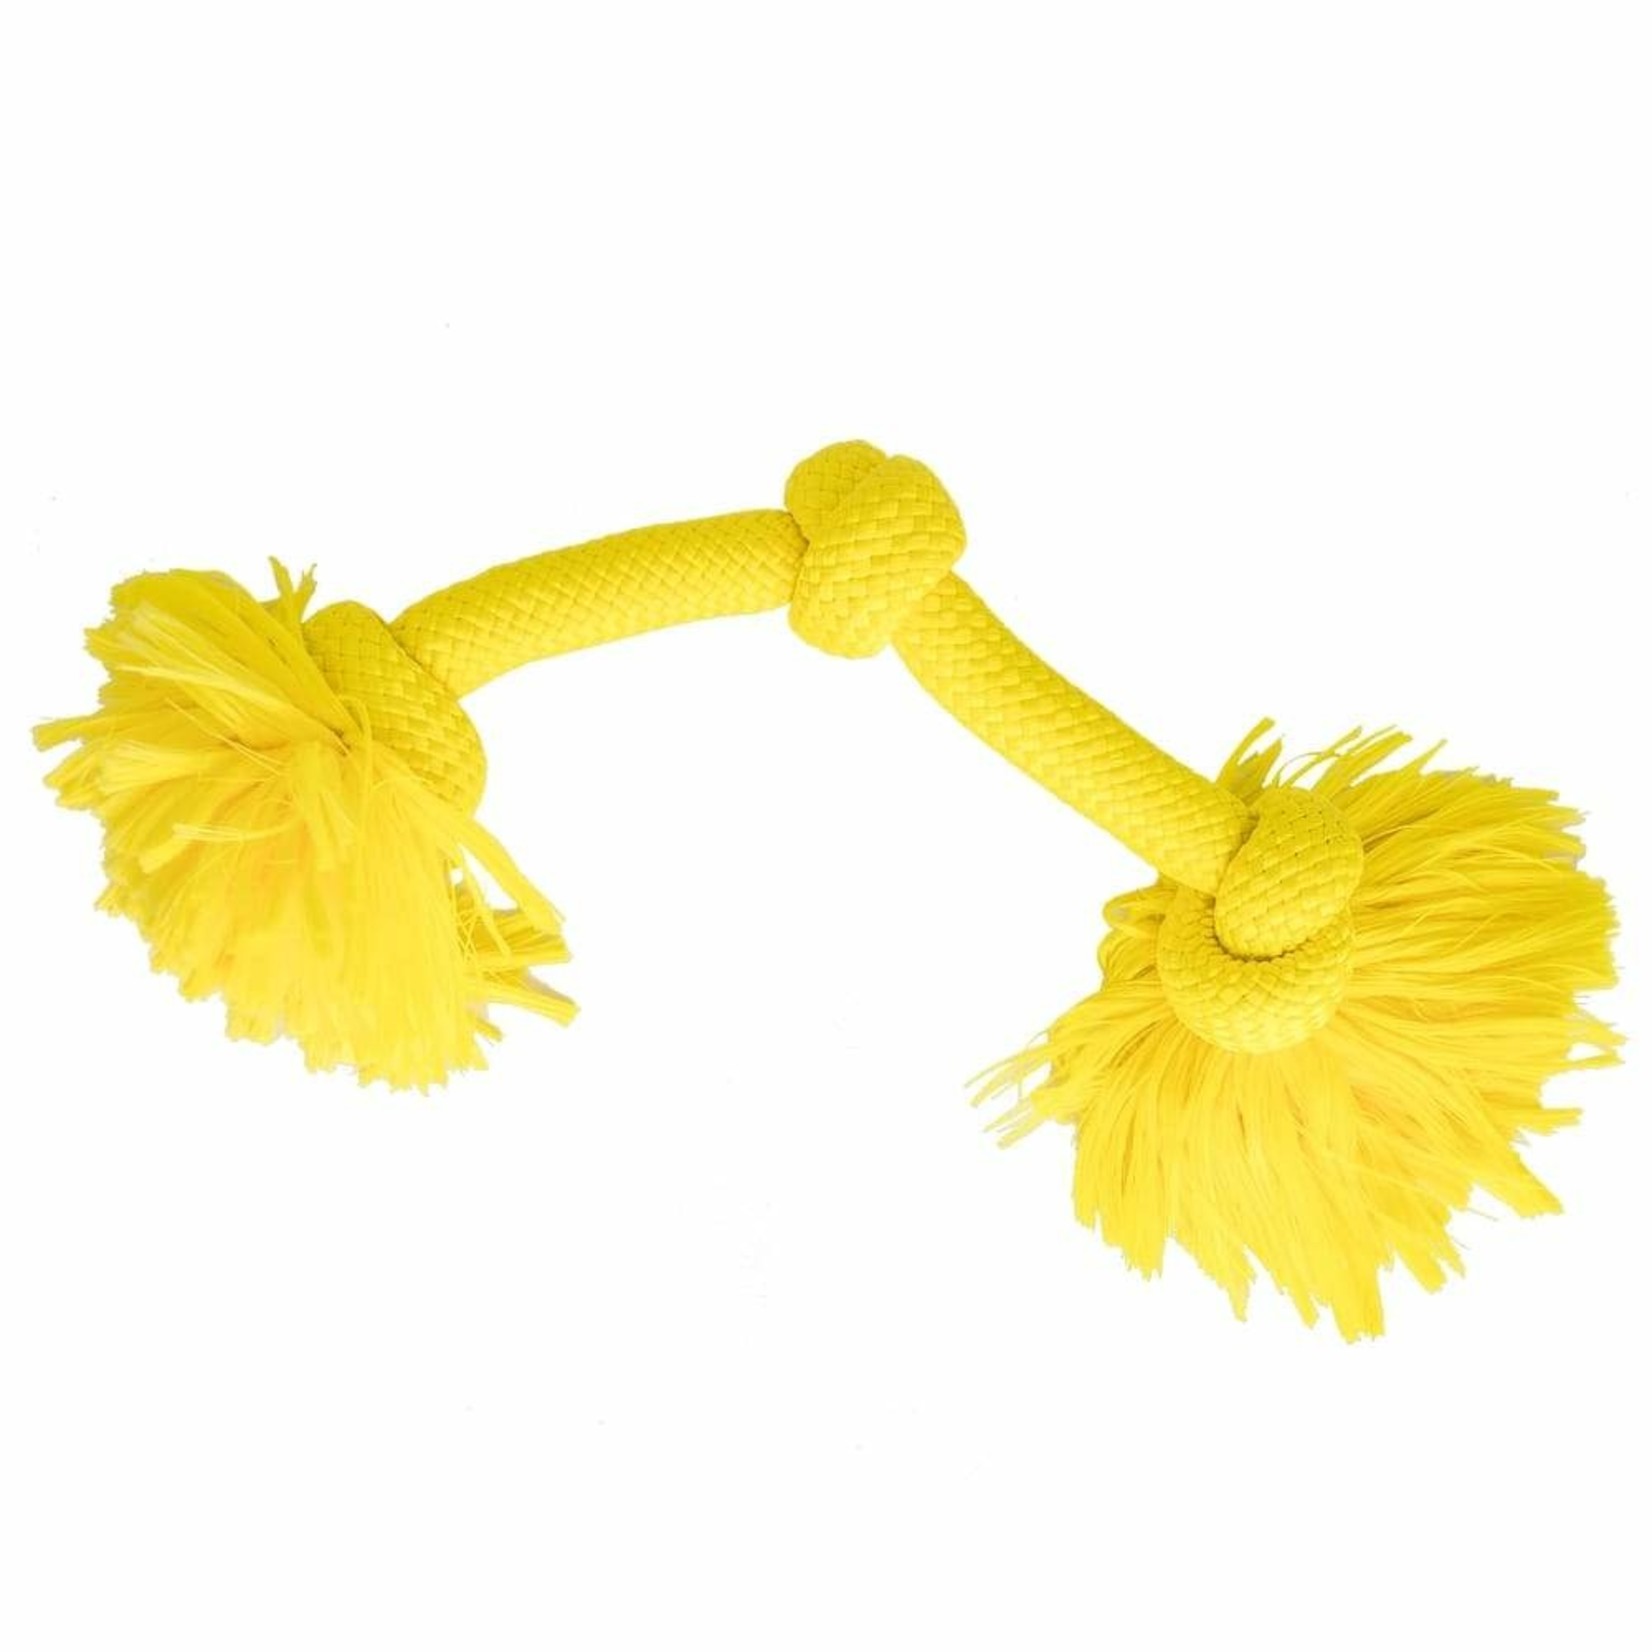 Playology Dri-Tech Rope Scented Dog Toy